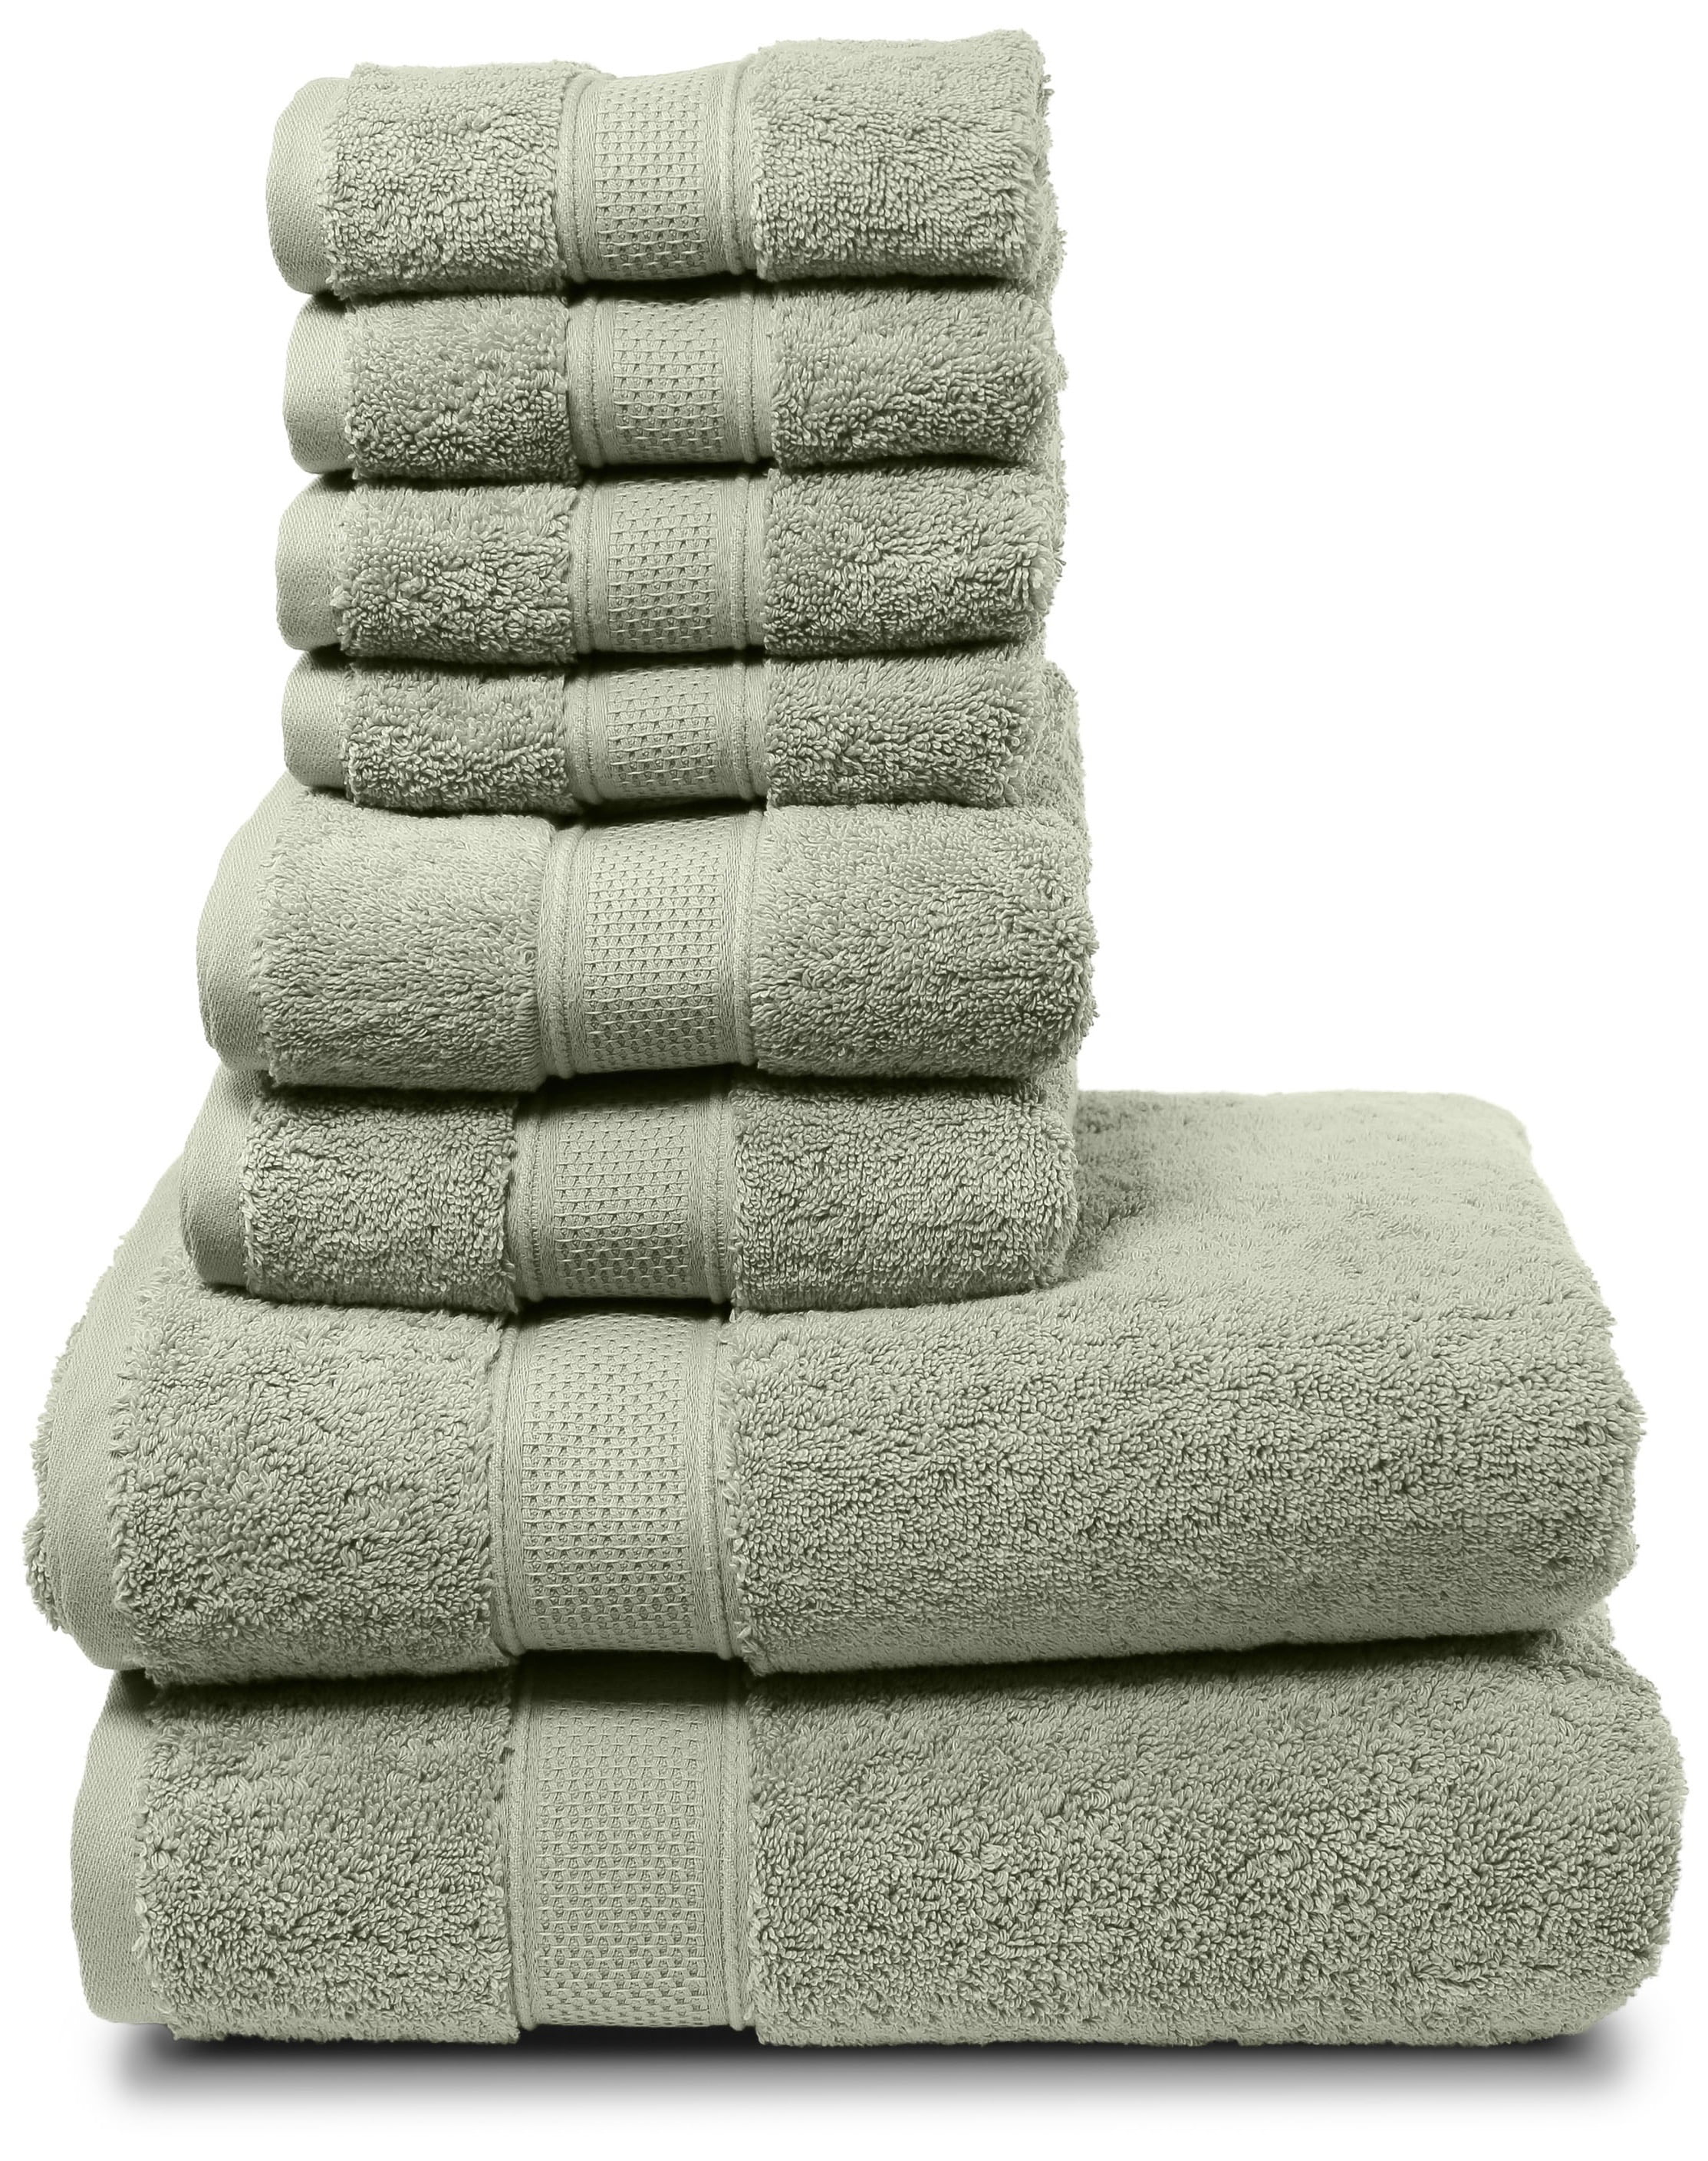 Maura Exquisite 4-Piece Turkish Bath Towel Set: Indulge in Unparalleled  Luxury with Ultra-Soft, Thick, and Plush Towels for a Premium Hotel & Spa